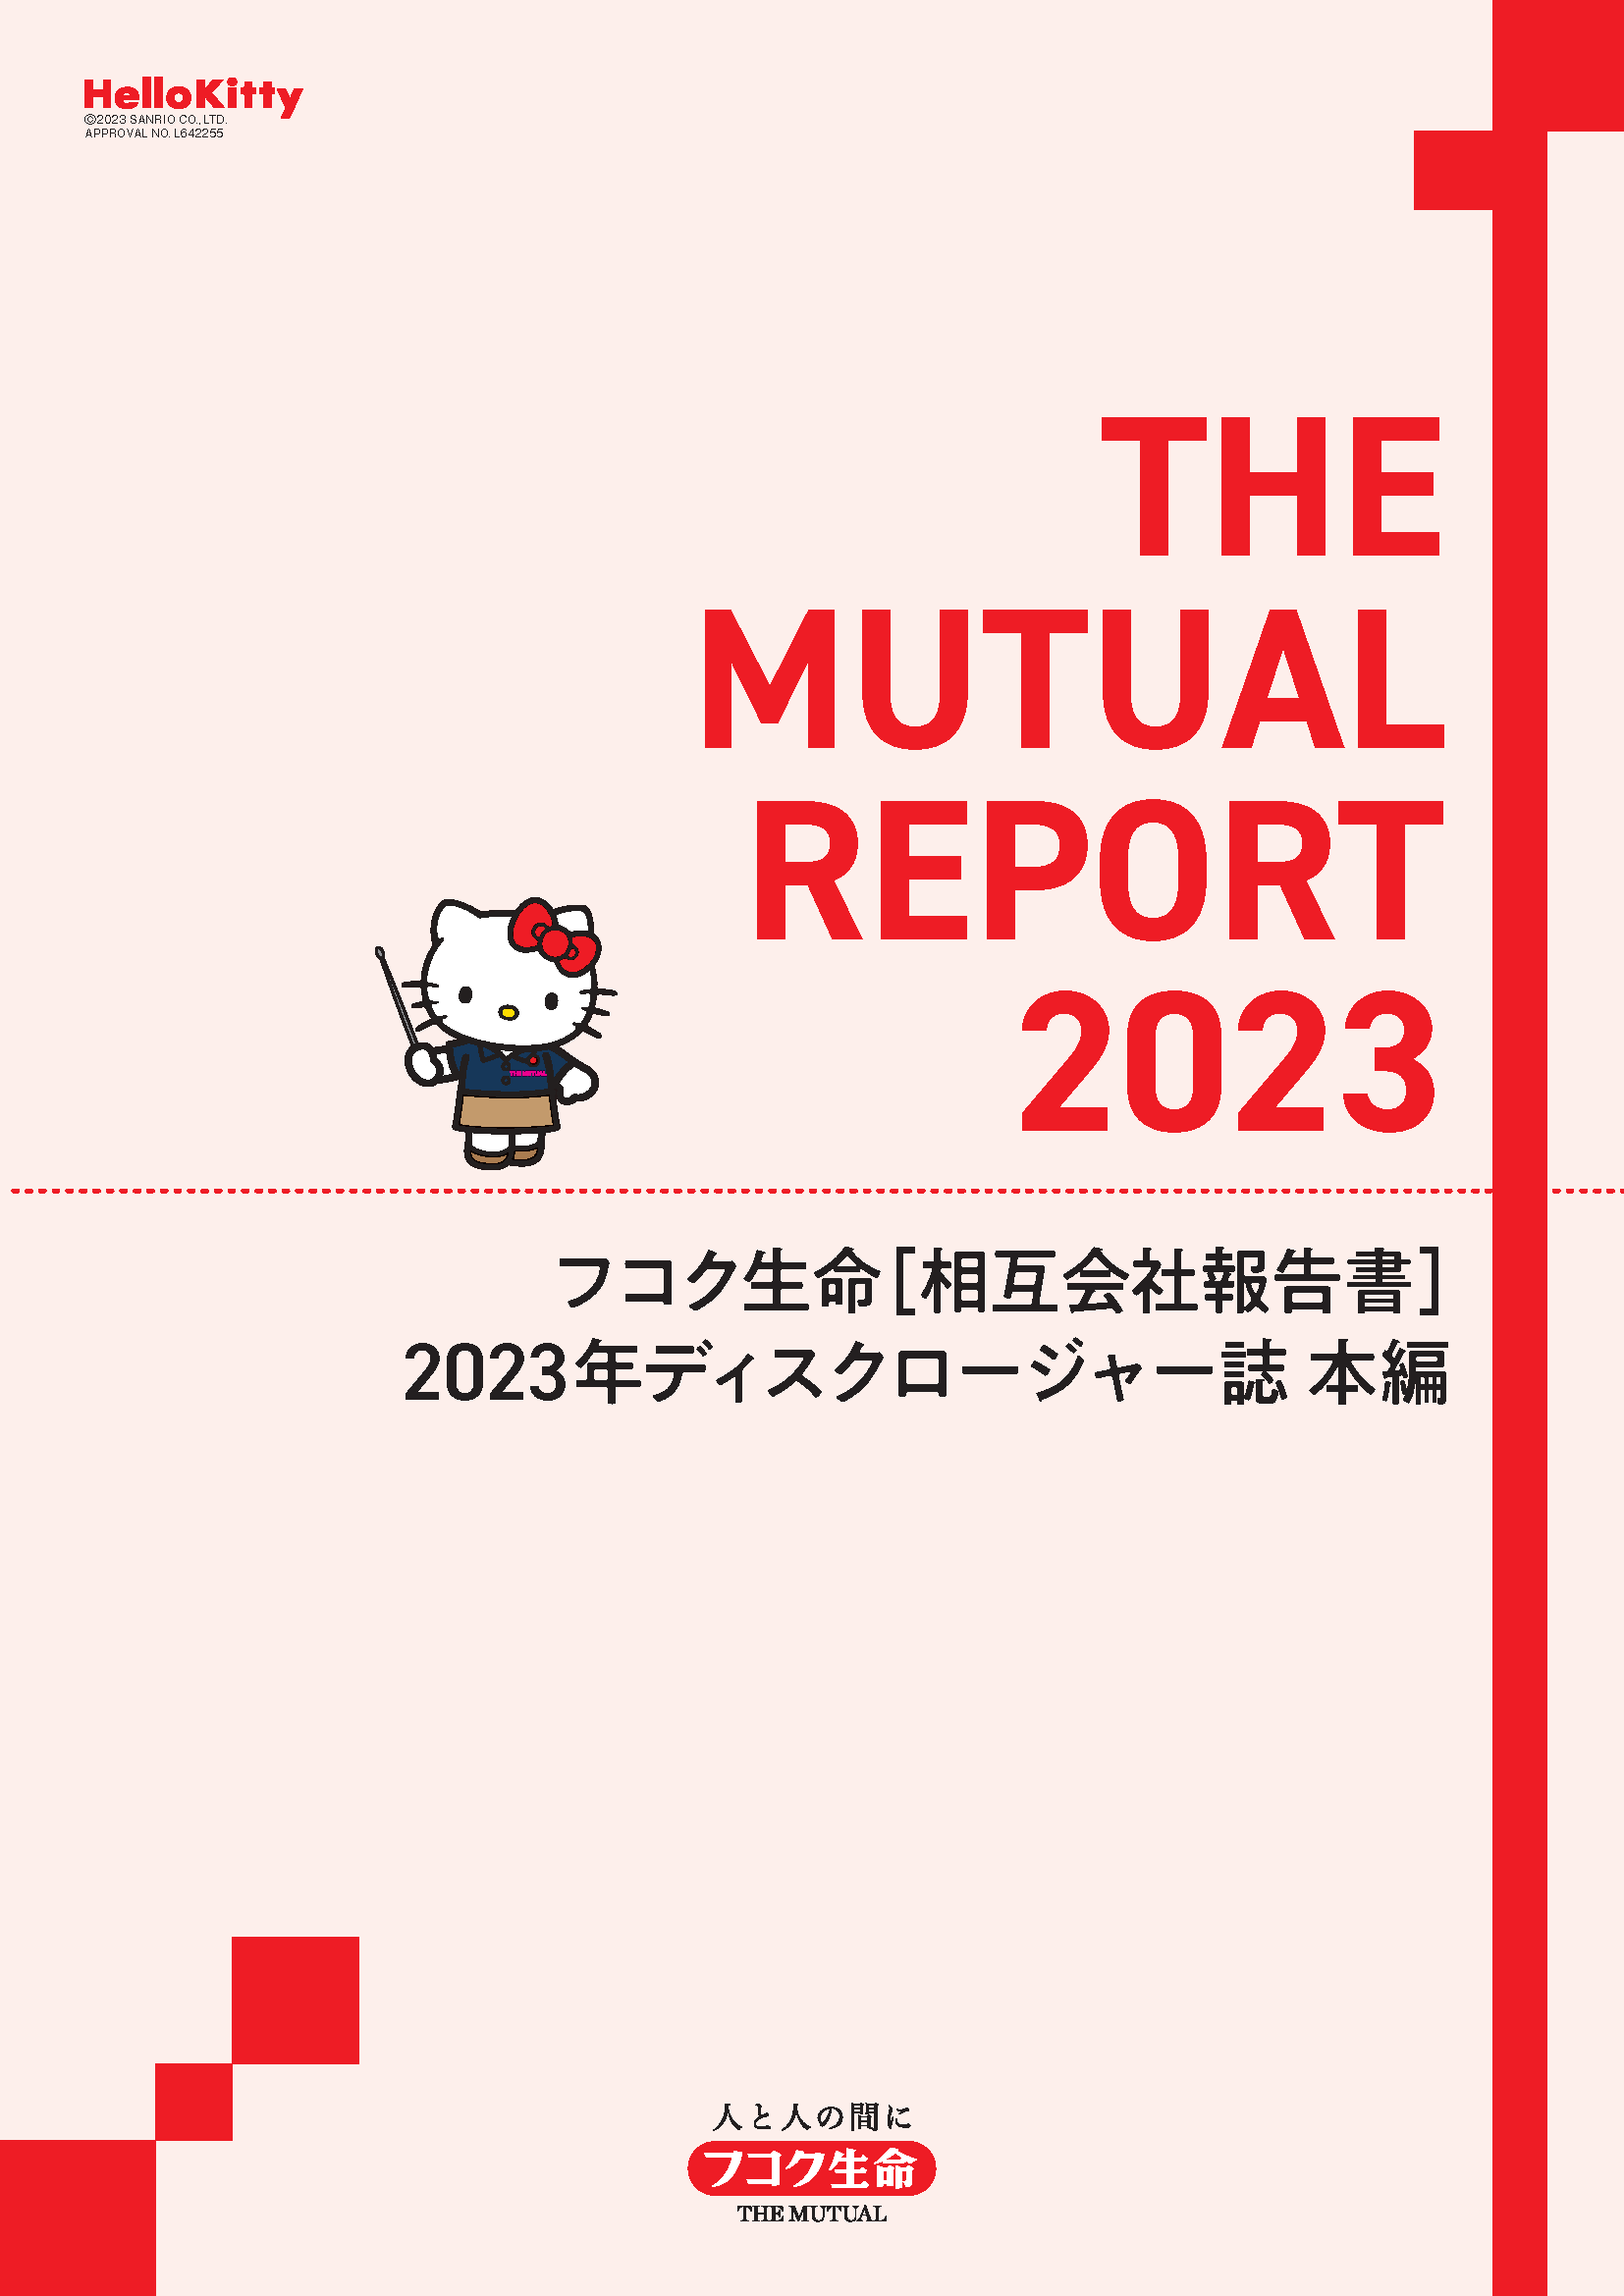 THE MUTUAL REPORT 2023